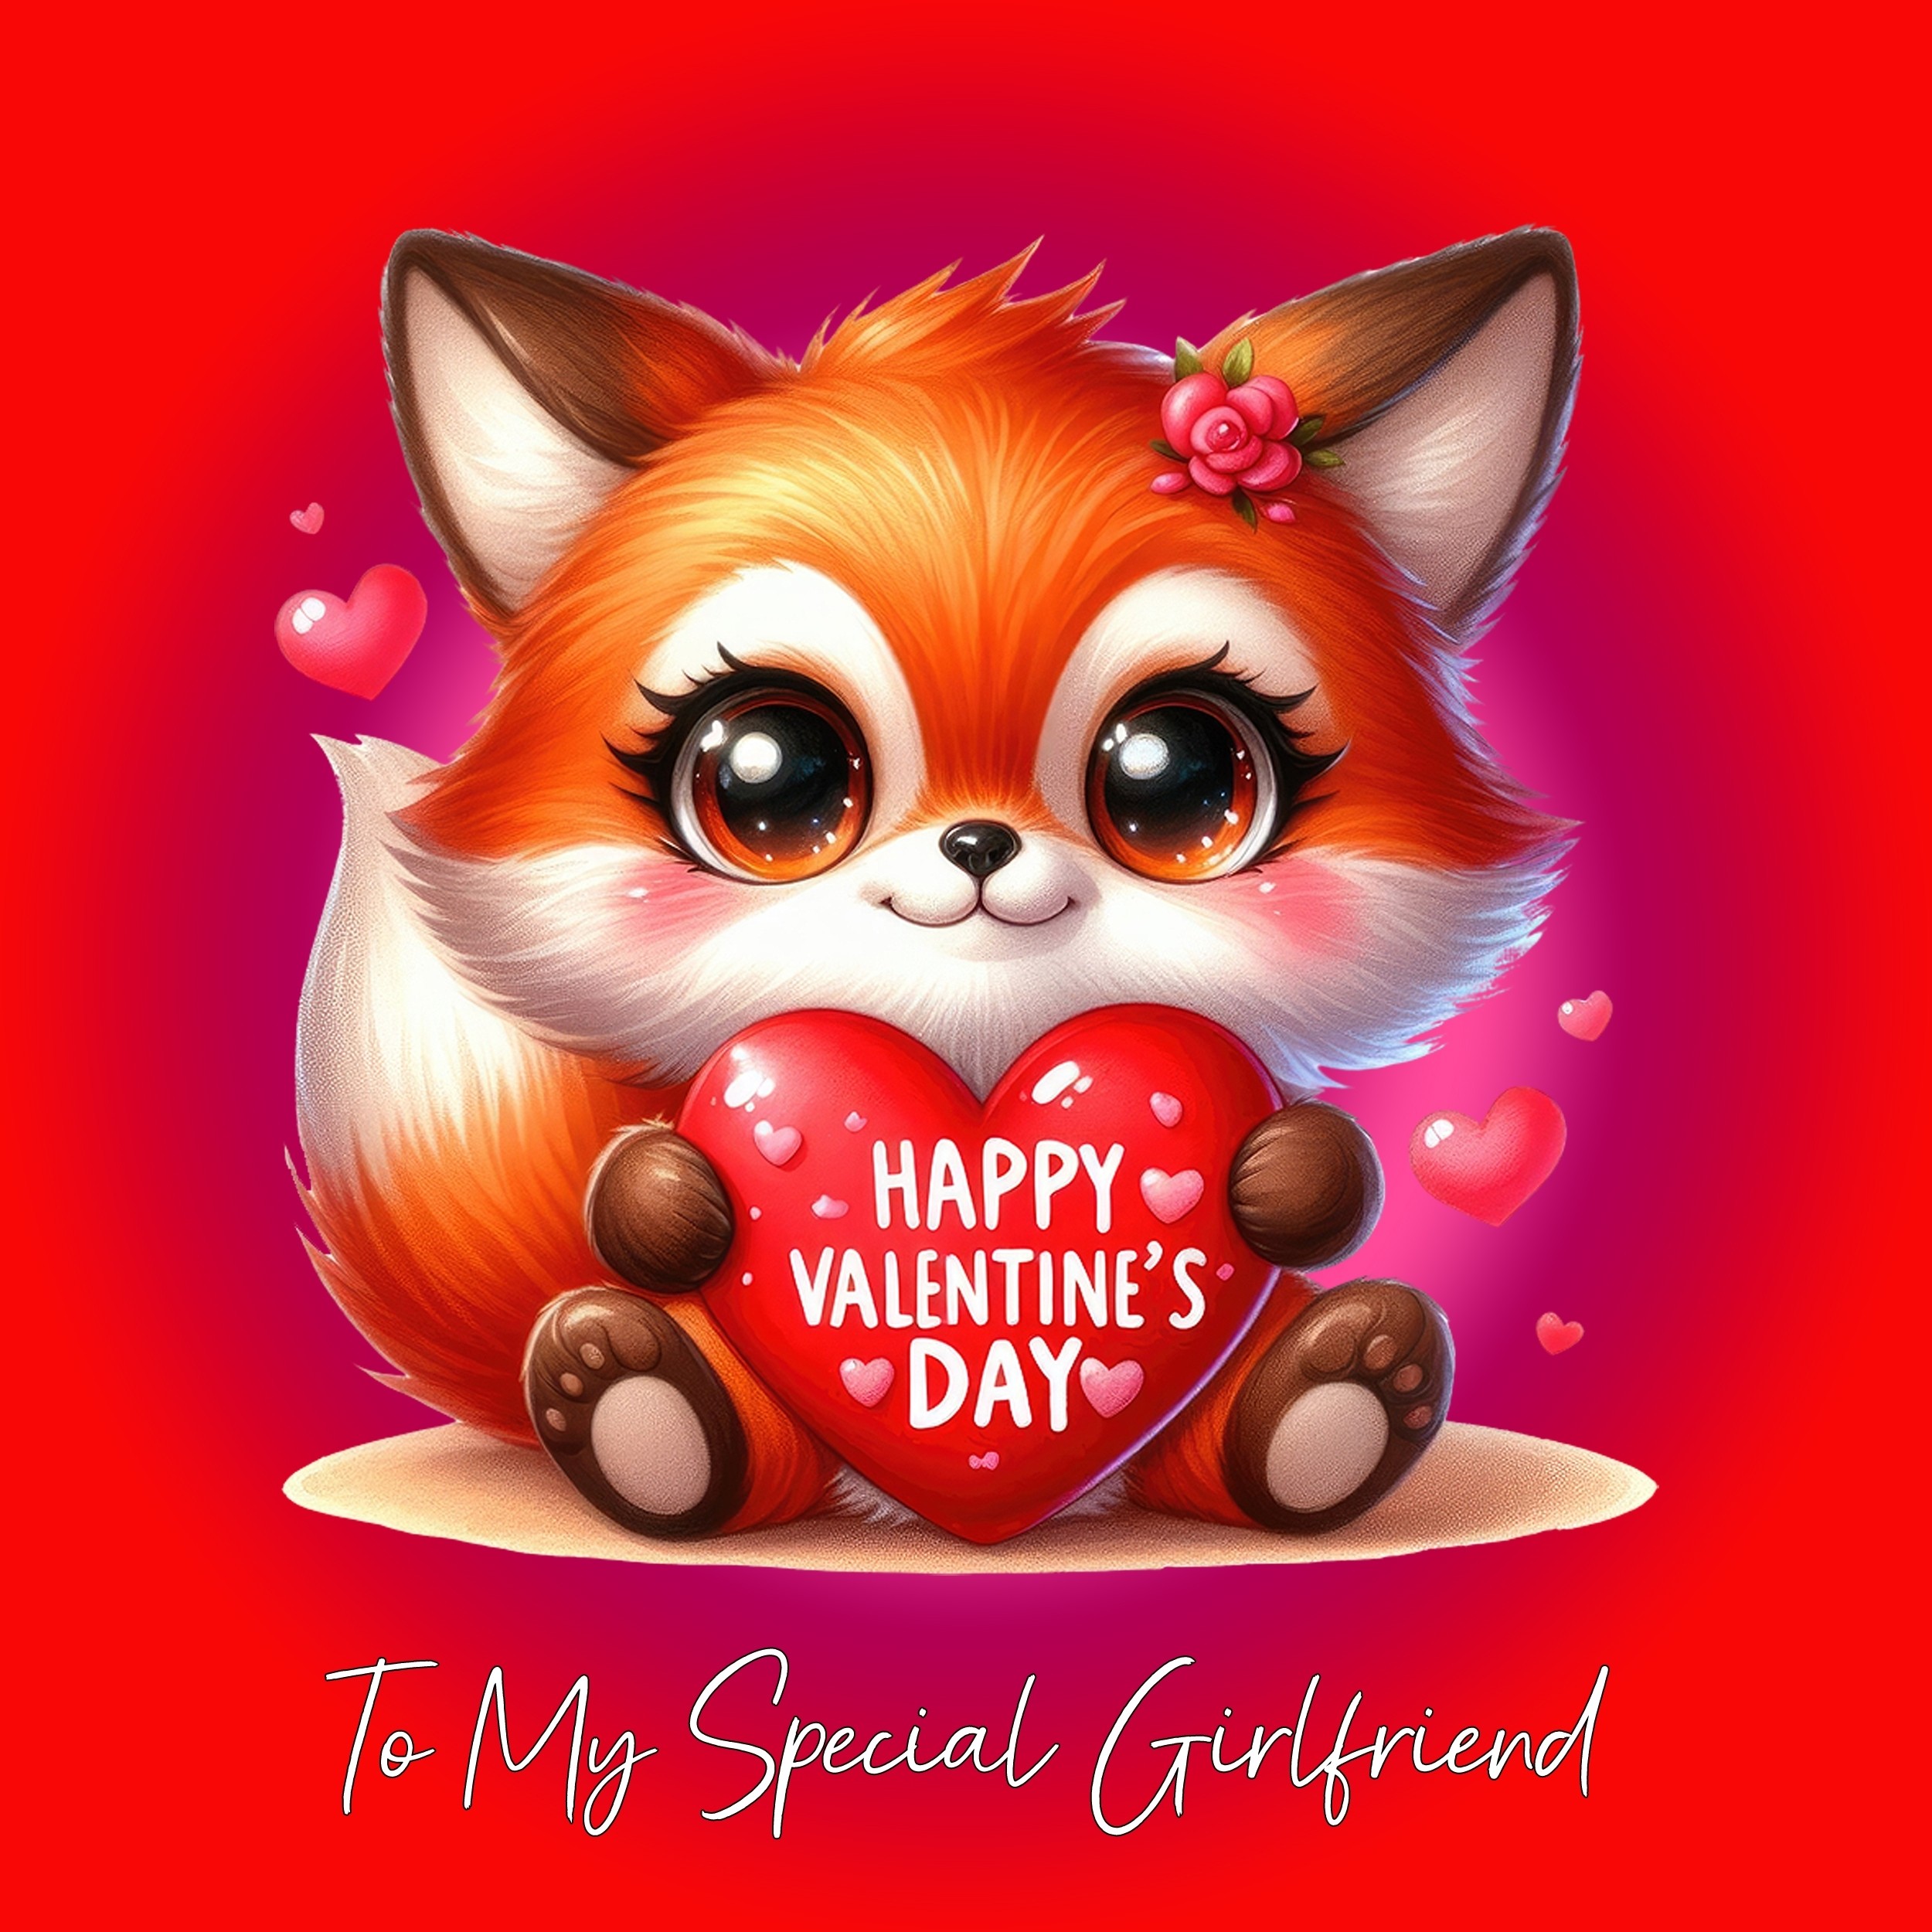 Valentines Day Square Card for Girlfriend (Fox)